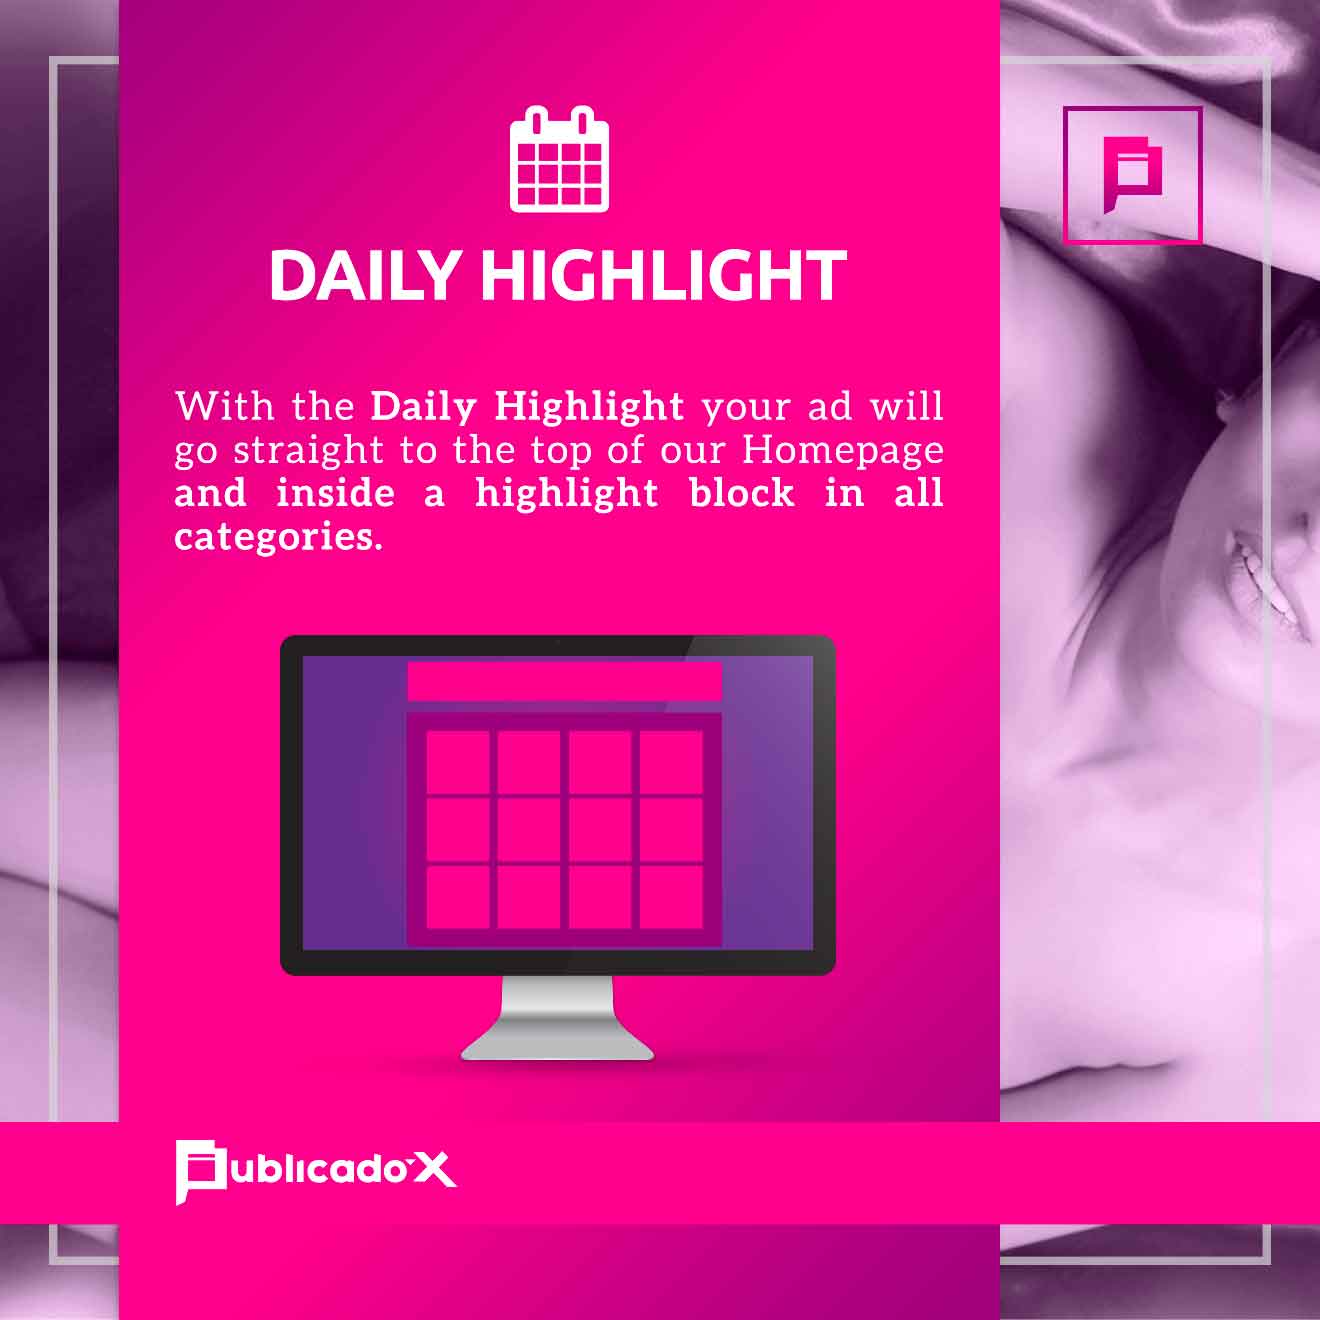 With the Daily Highlight your ad will go straight to the top of our Homepage and in a separated highlighted block in all categories.